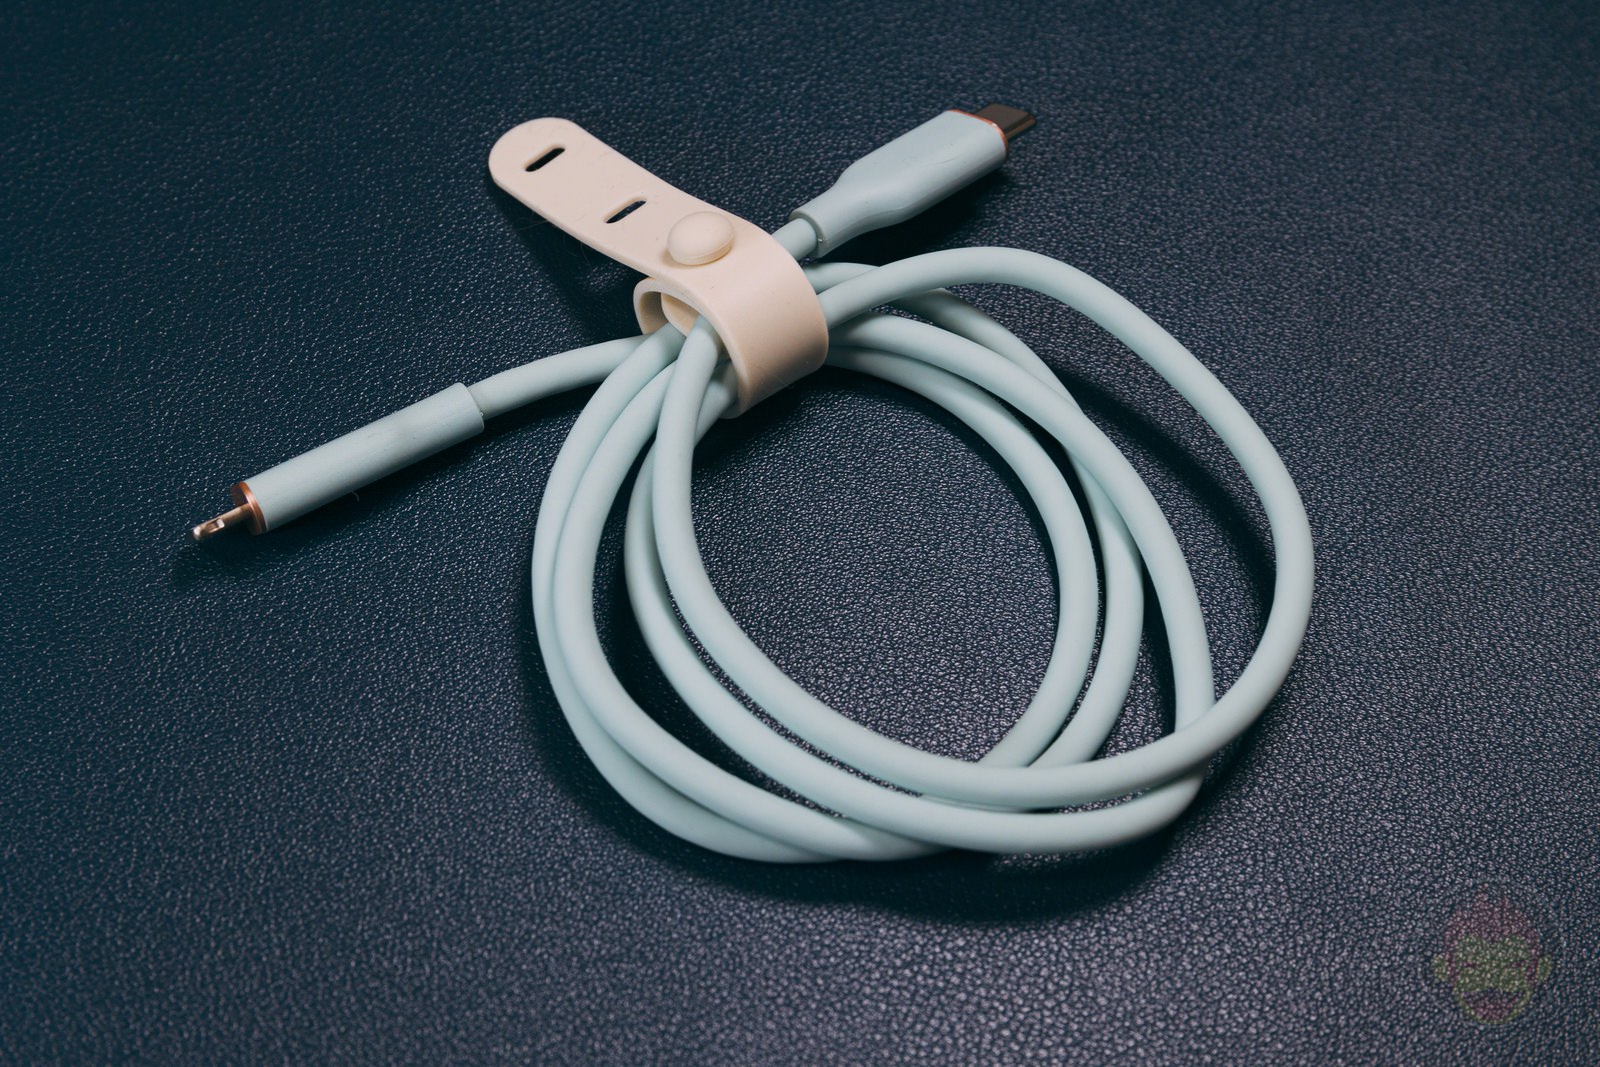 Anker-PowerLine-III-Flow-USBC-to-Lightning-Cable-Review-16.jpg